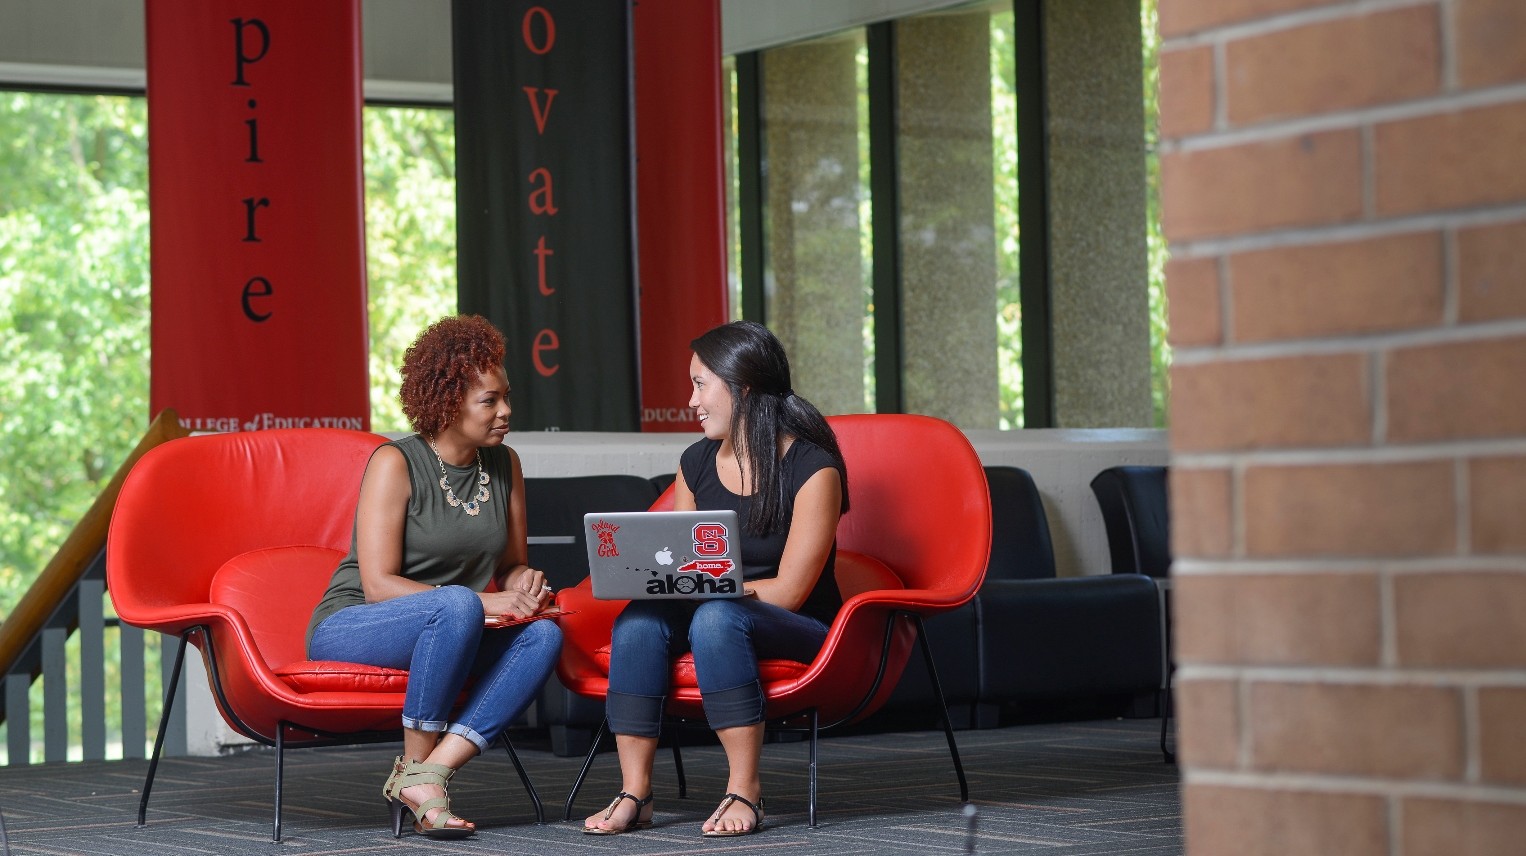 Two women talking in campus building